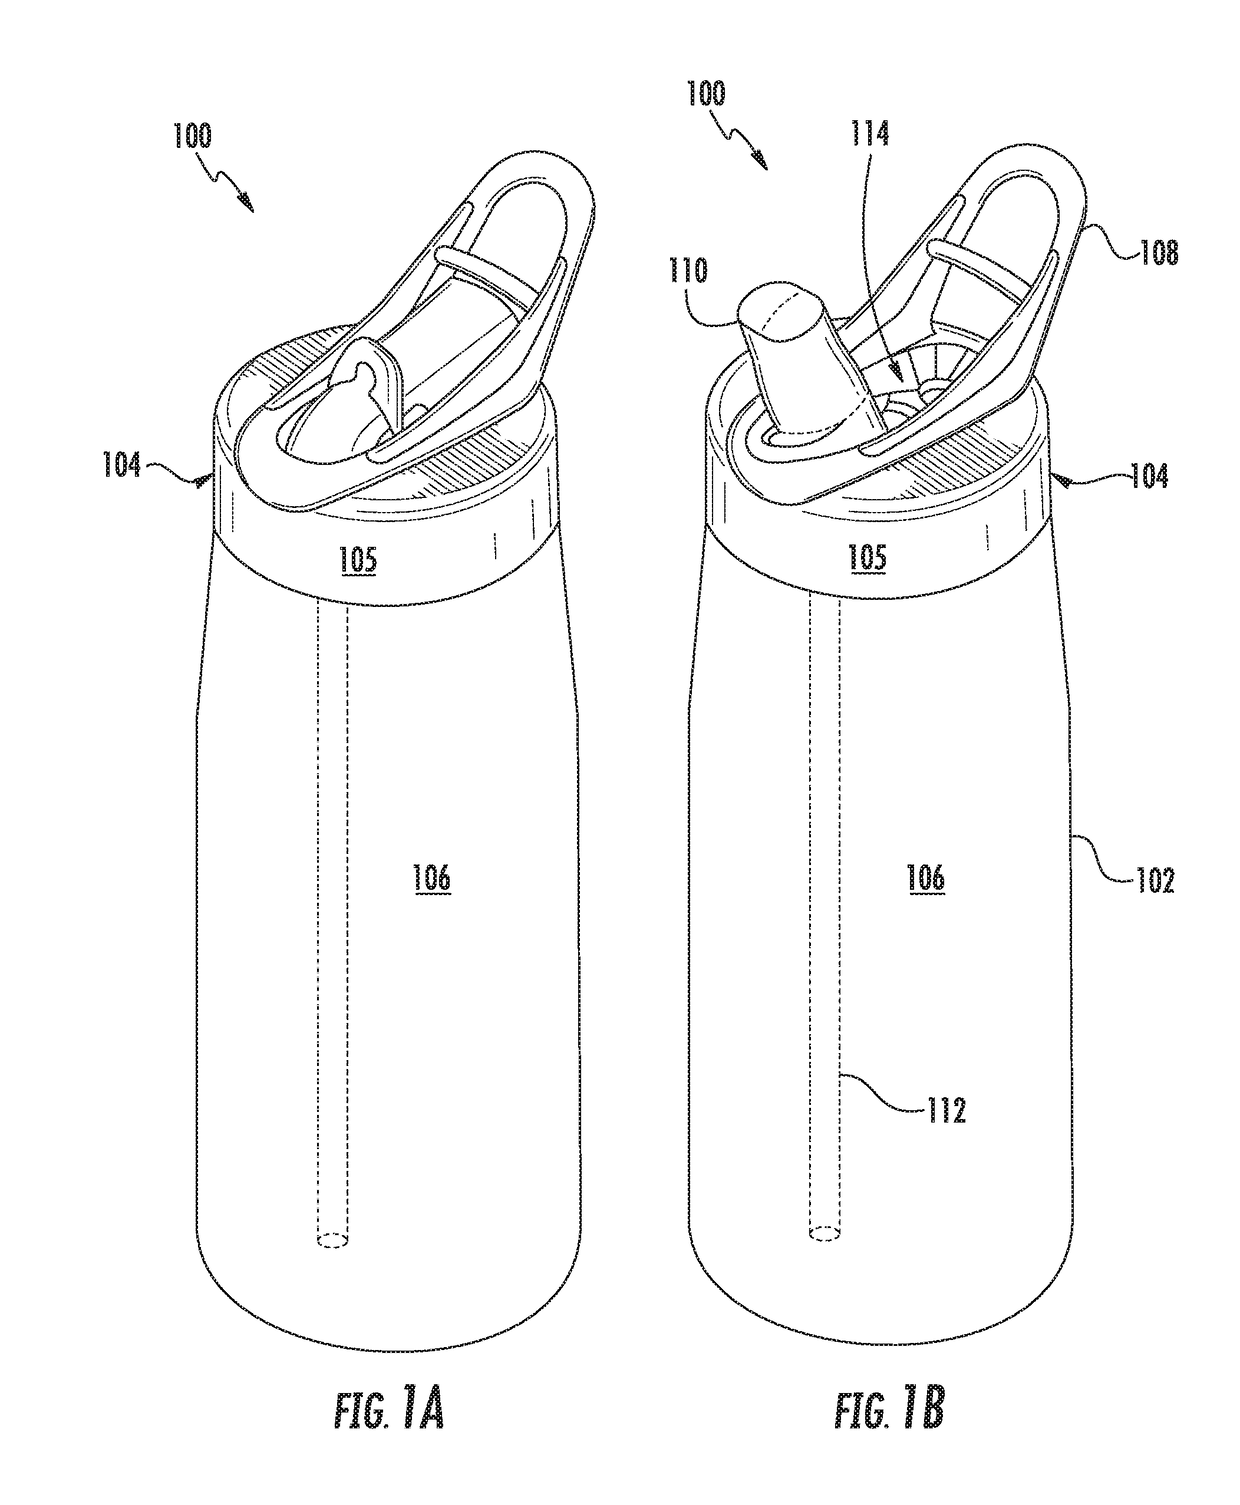 Refillable design for a closed water bottle